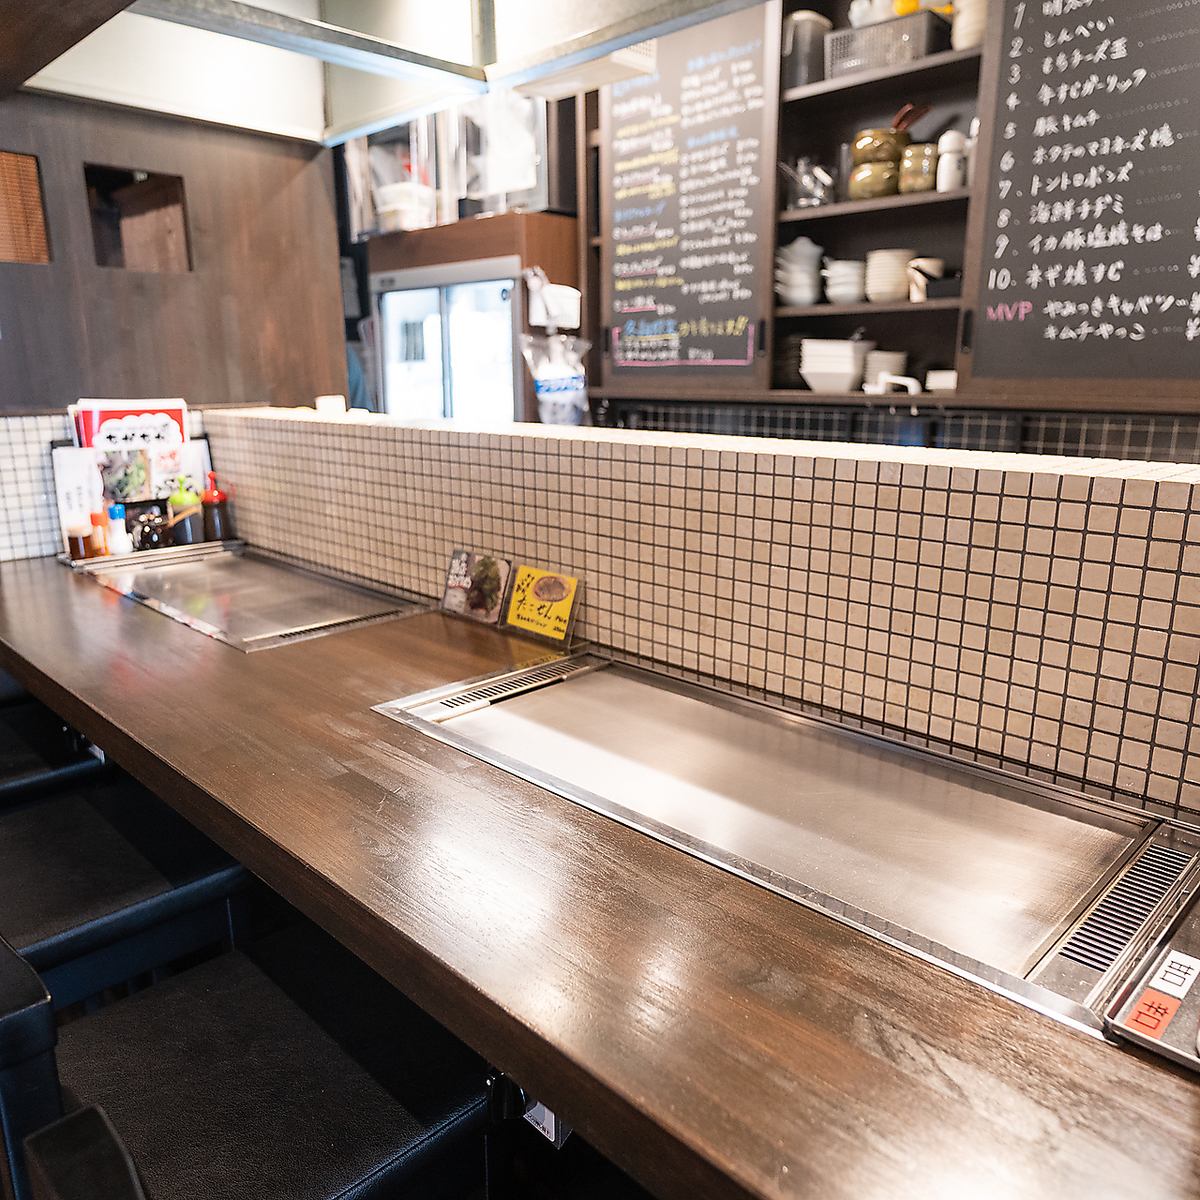 The best counter seat for one person or a date ☆ With an iron plate that can be baked in front of you!